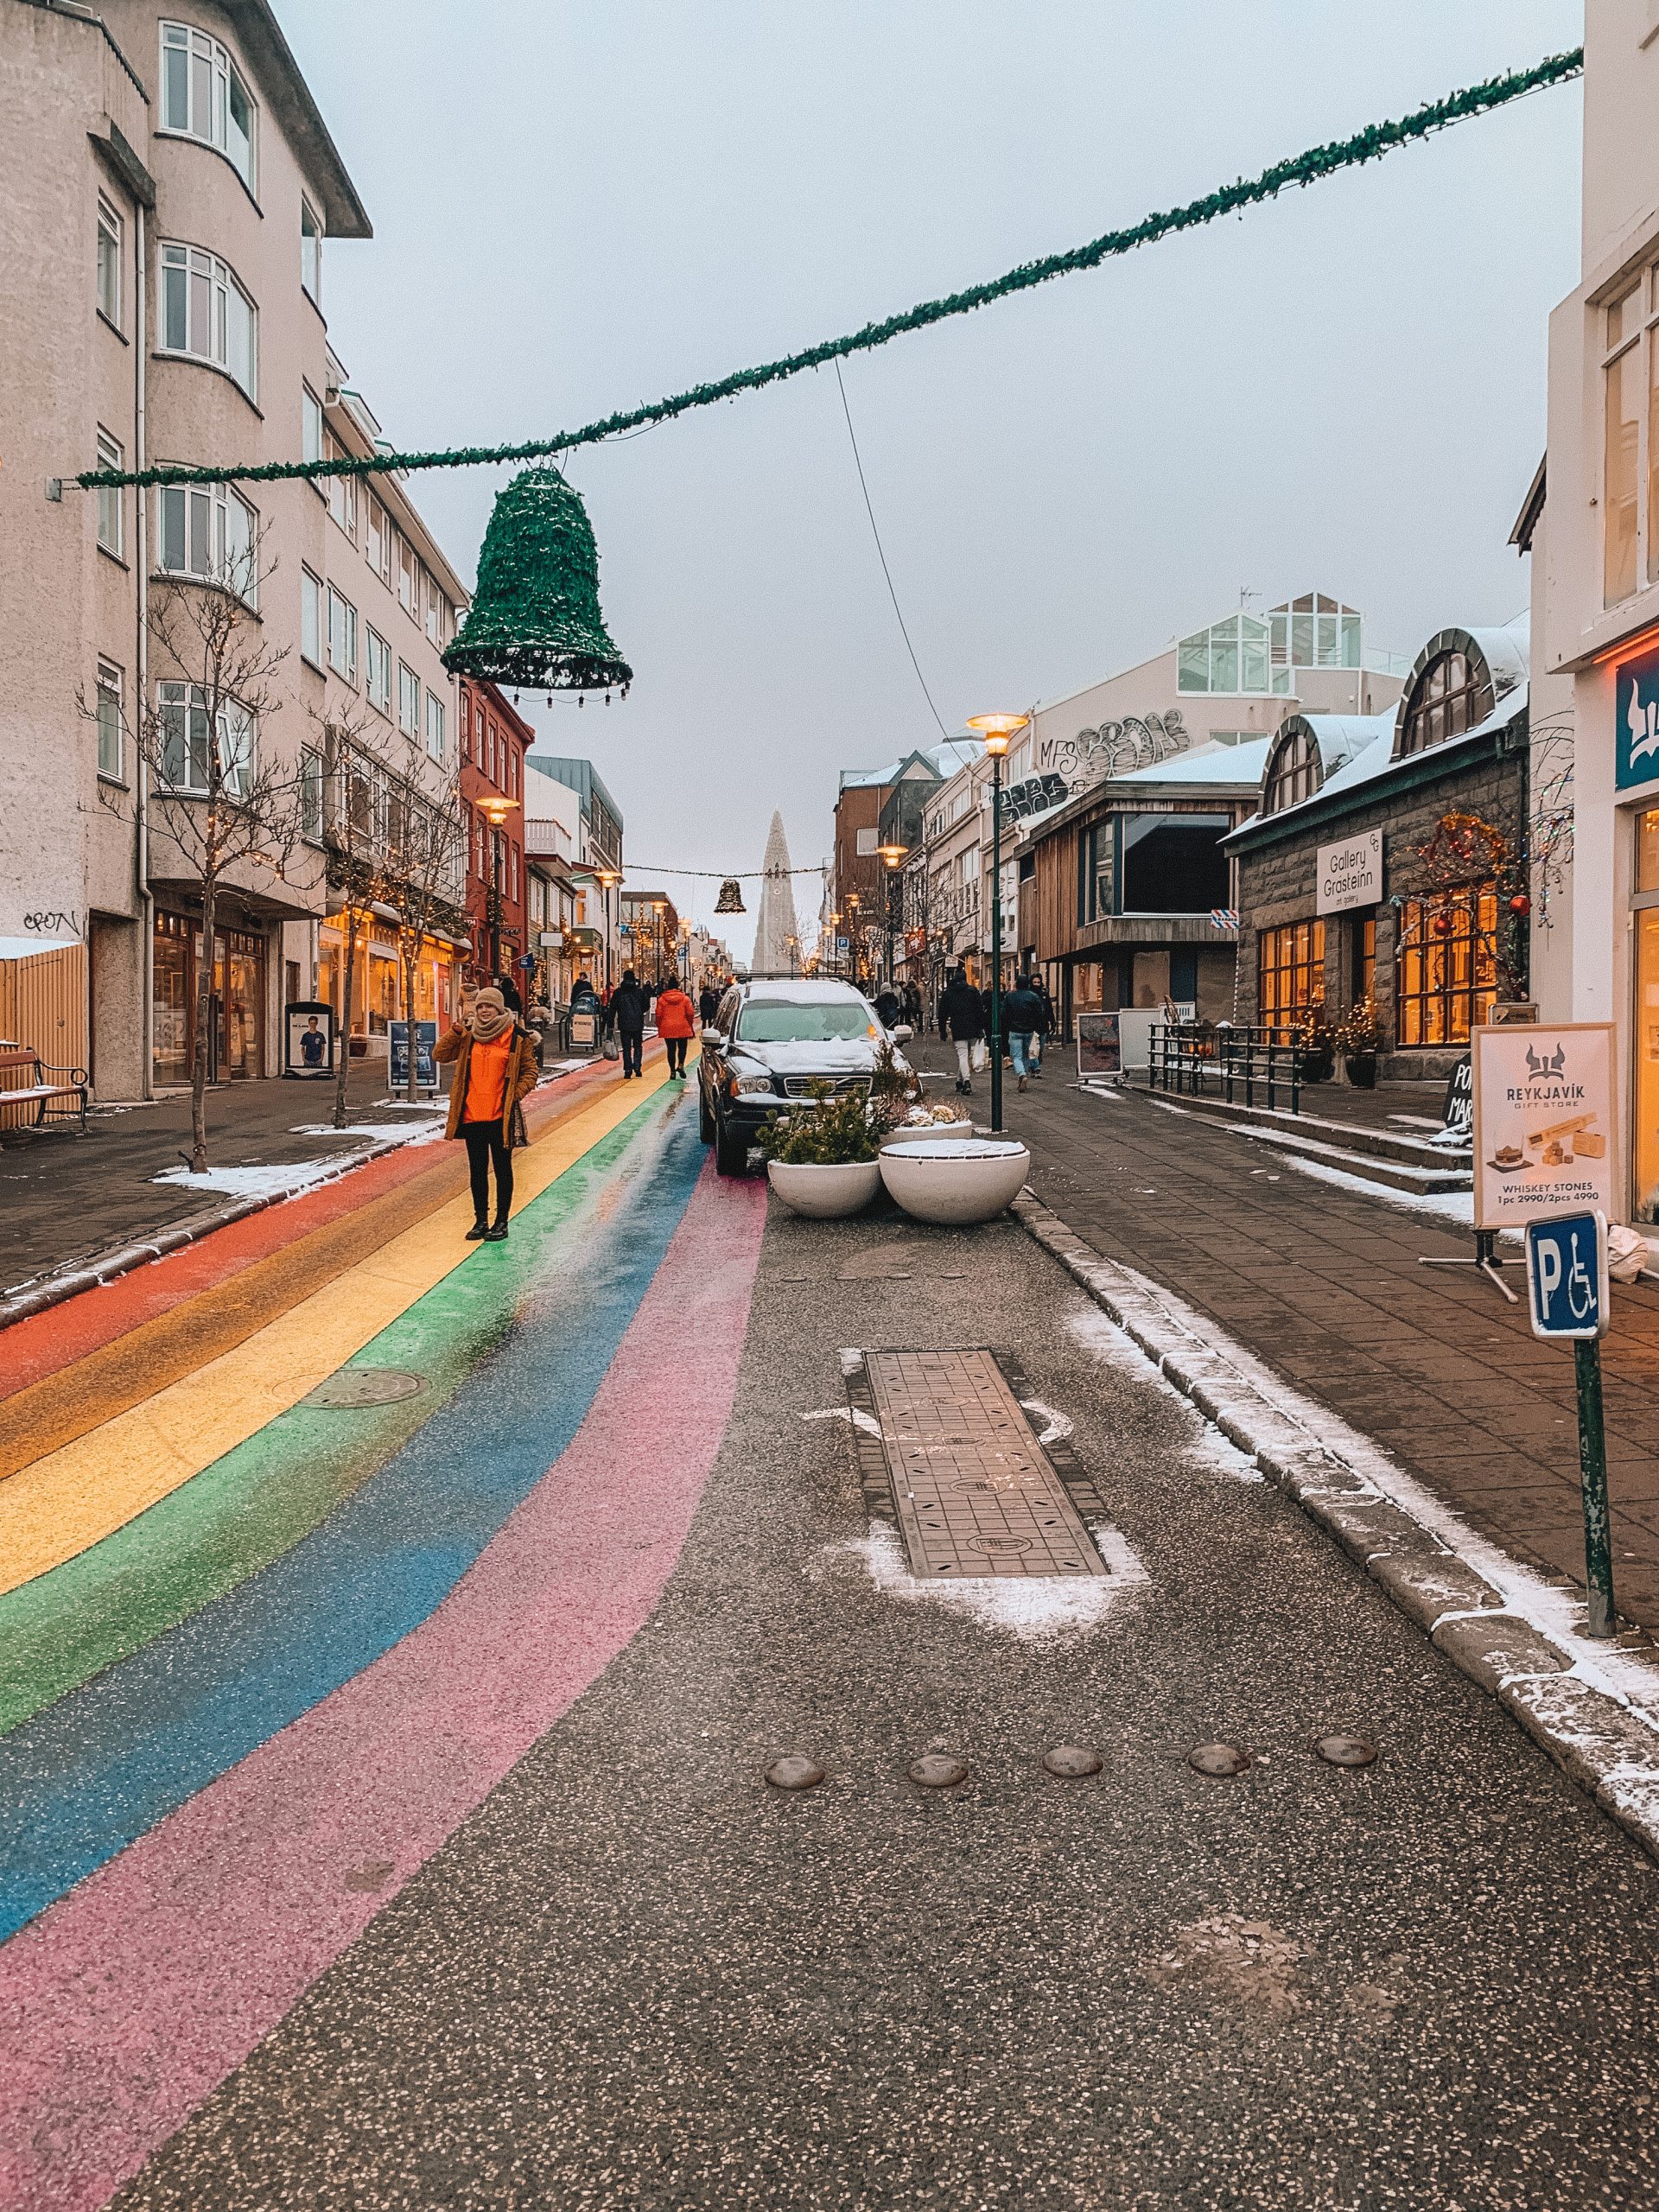 A street in Reykjavik with rainbow paint on the floor